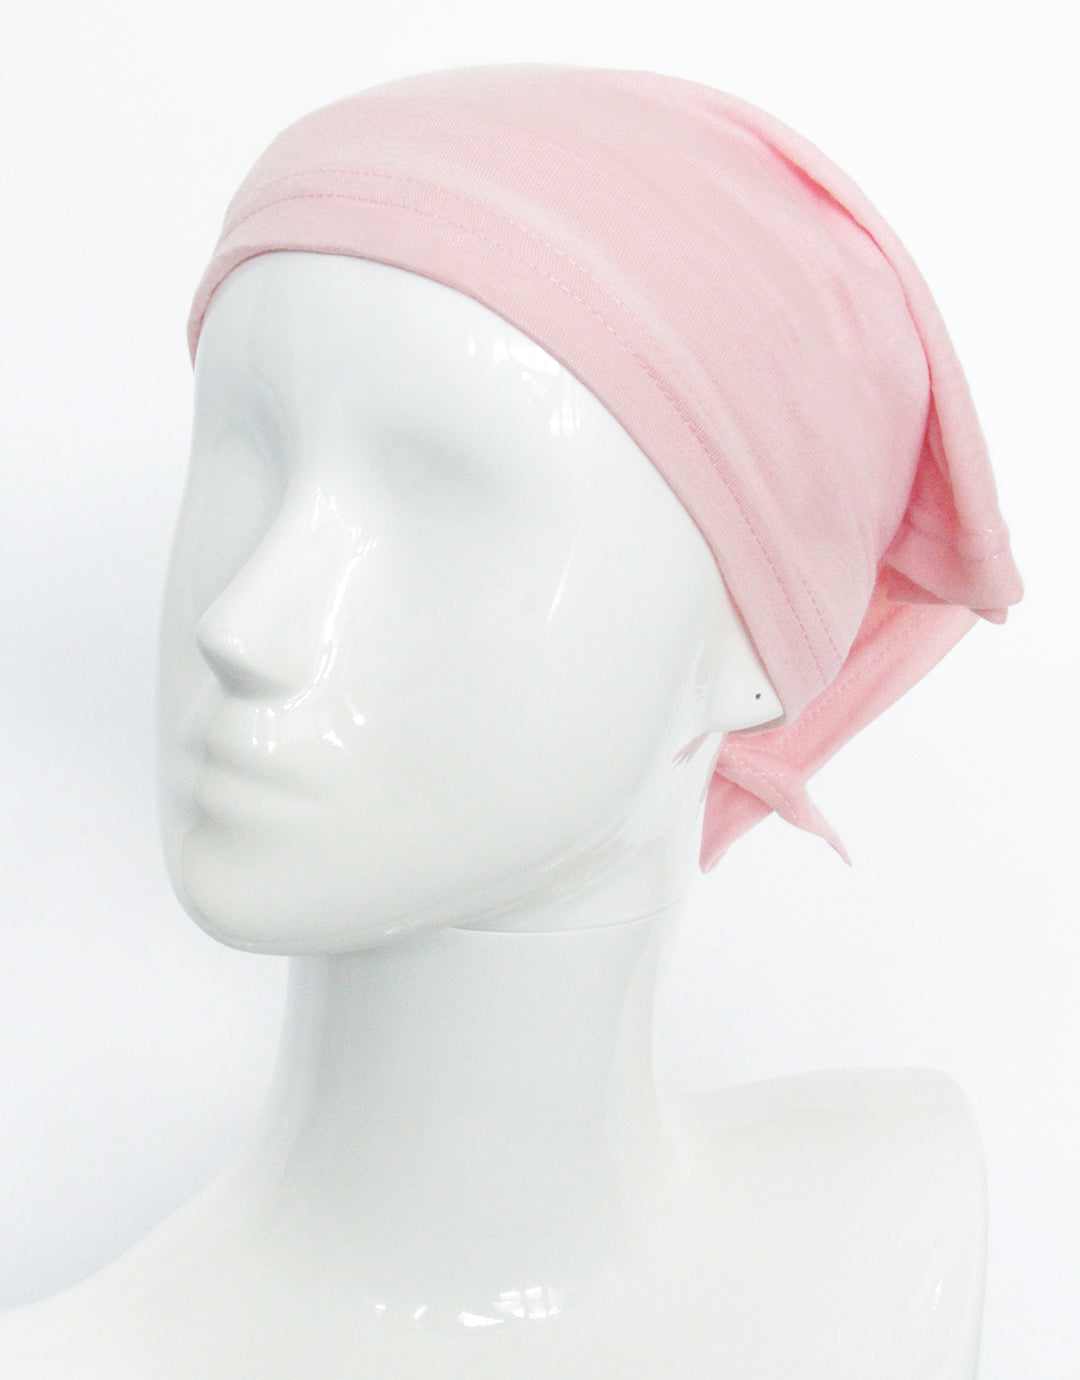 BANDED Women’s Full Coverage Headwraps + Hair Accessories - Peony Pink - Multi-style Headwrap